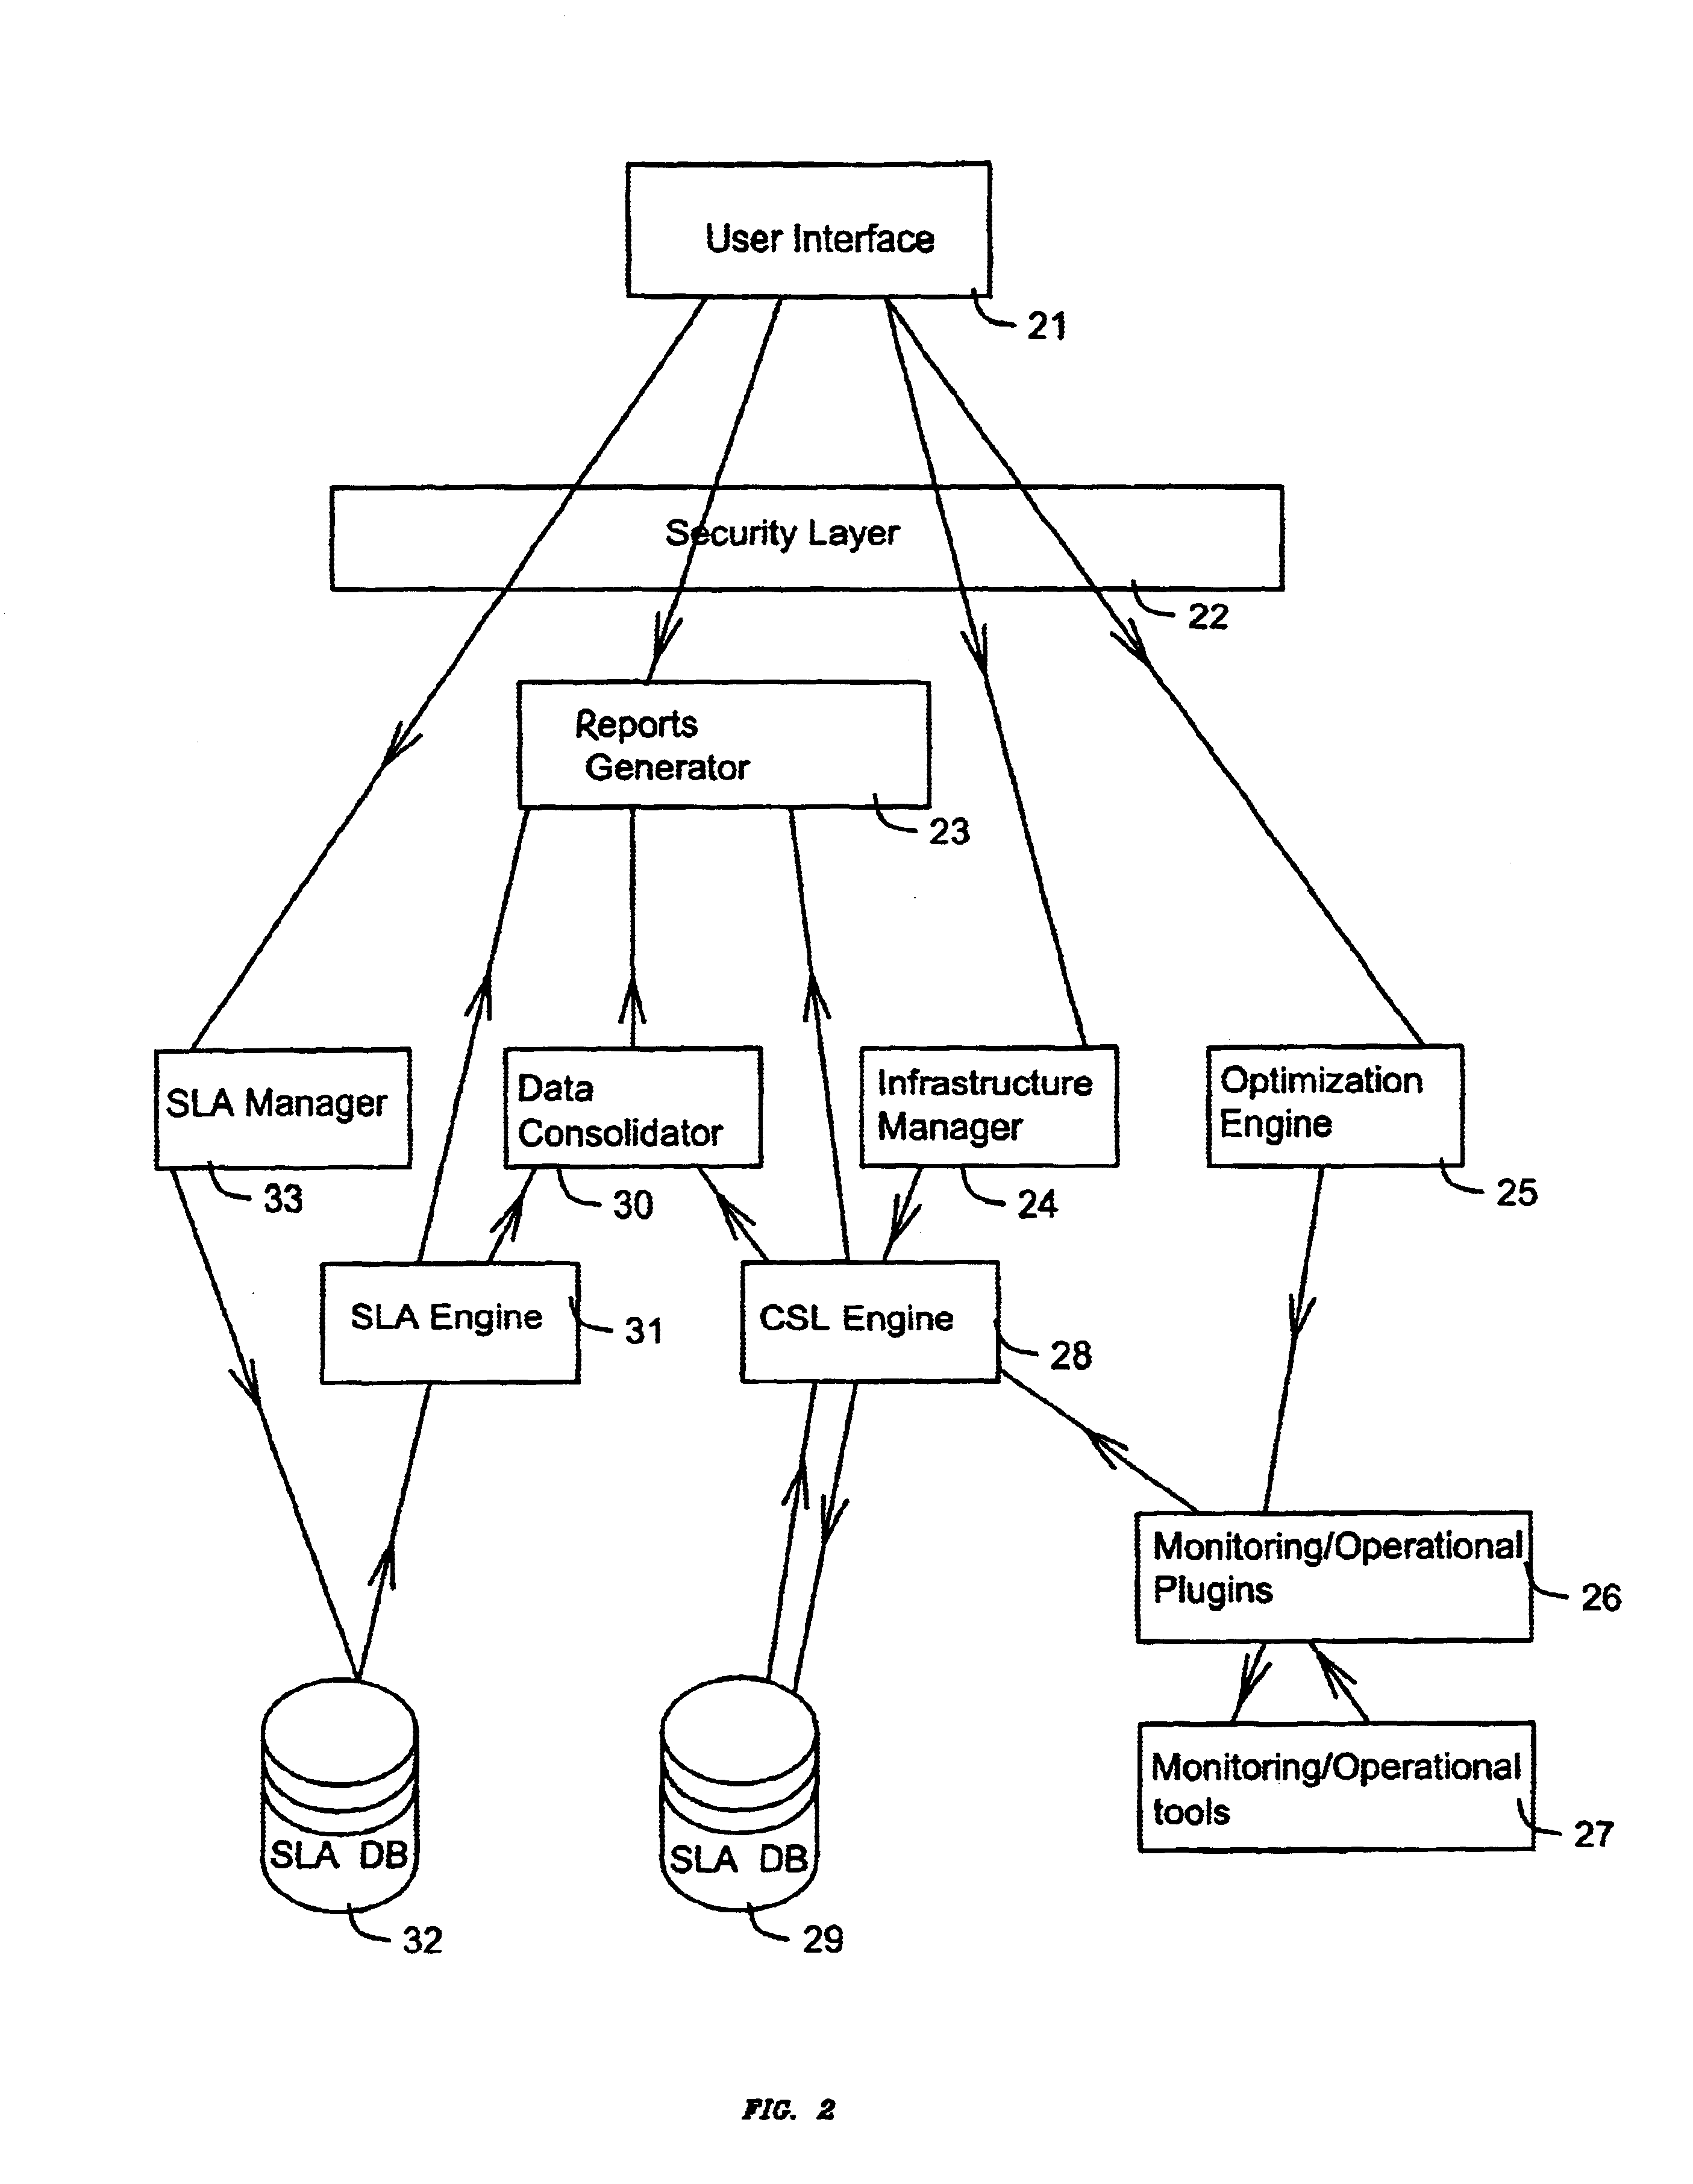 System use internal service level language including formula to compute service level value for analyzing and coordinating service level agreements for application service providers